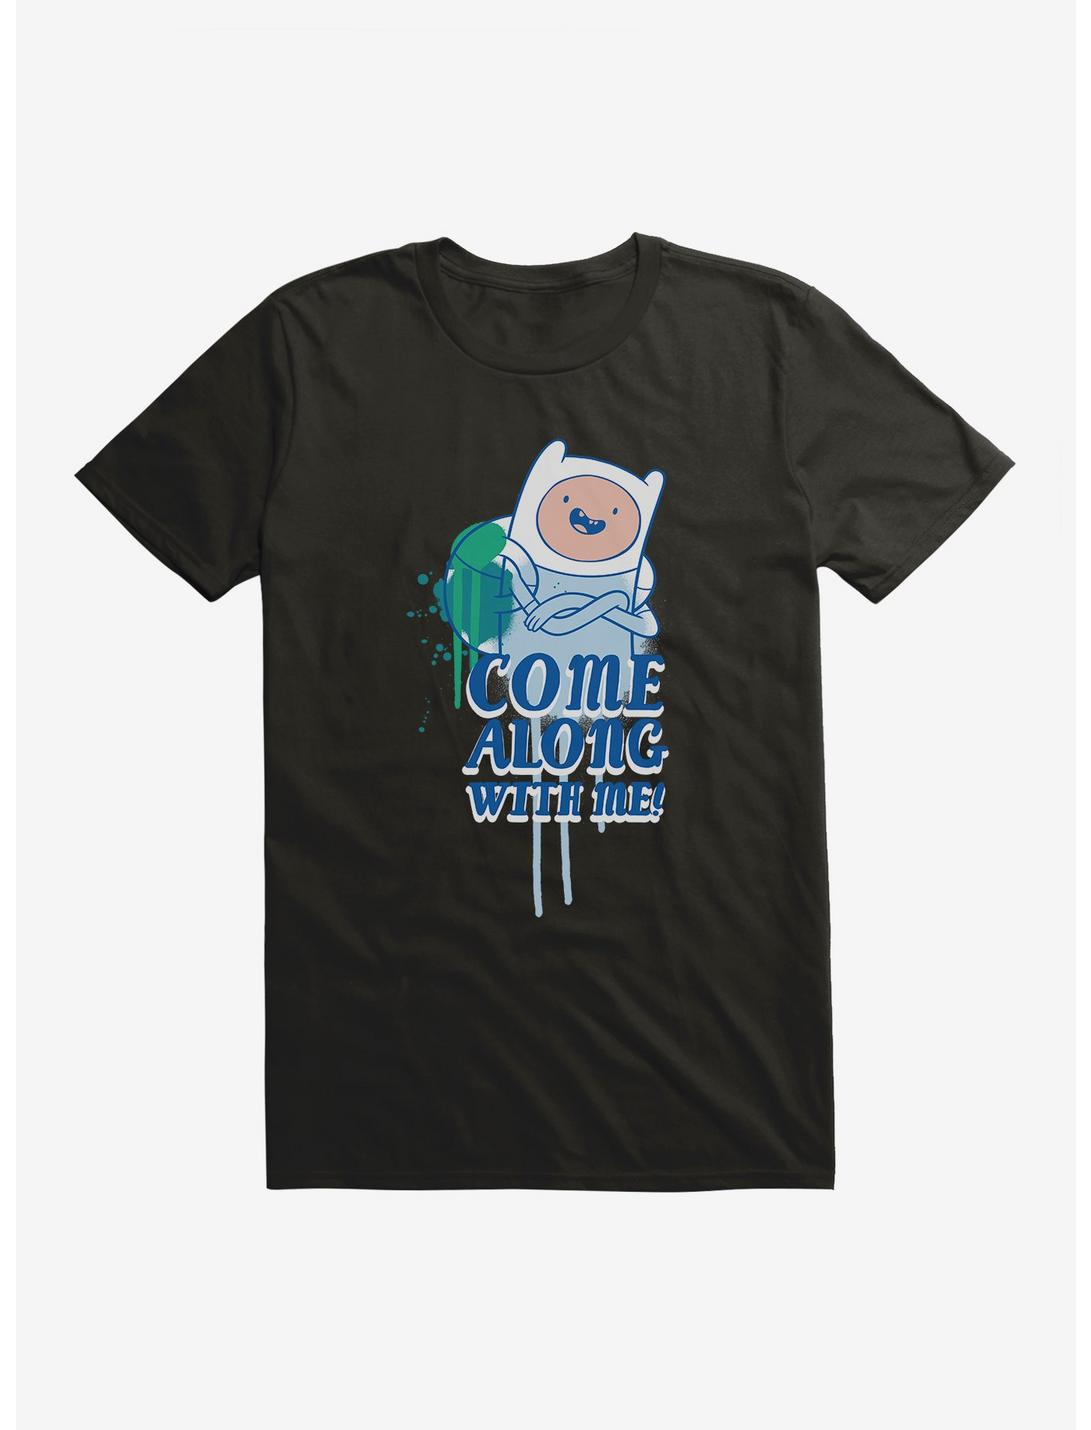 Adventure Time Come Along With Me T-Shirt, , hi-res